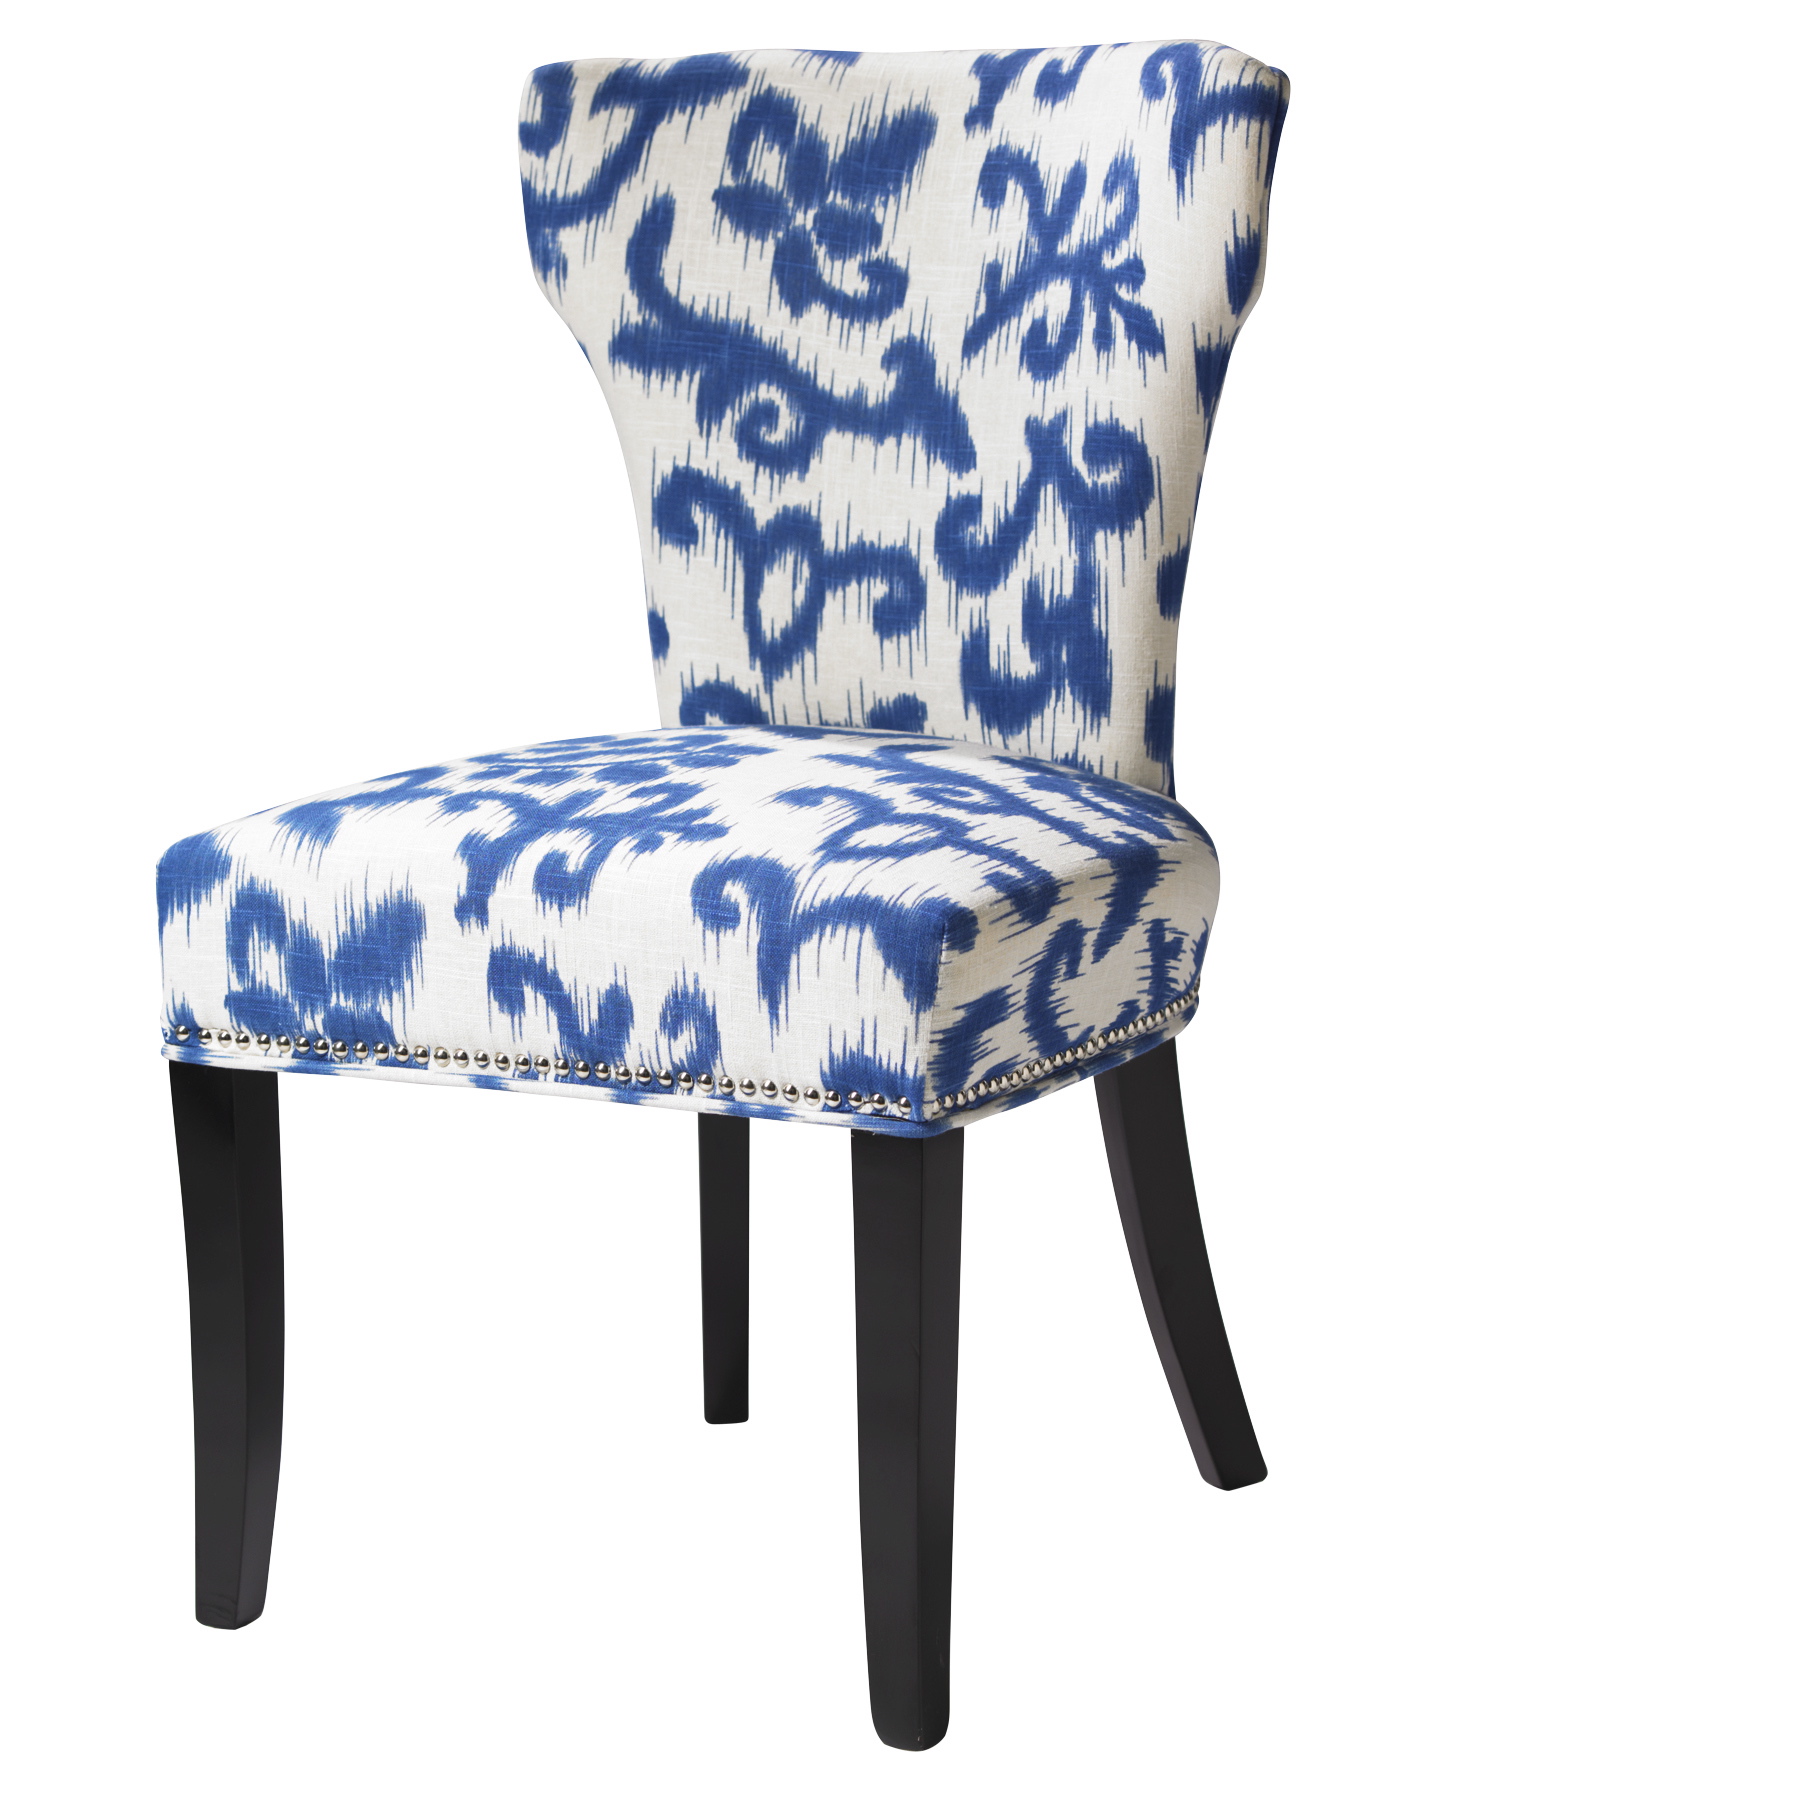 Blue and white prints, such as the fabric on this upholstered HomeGoods chair, are a big trend this spring.